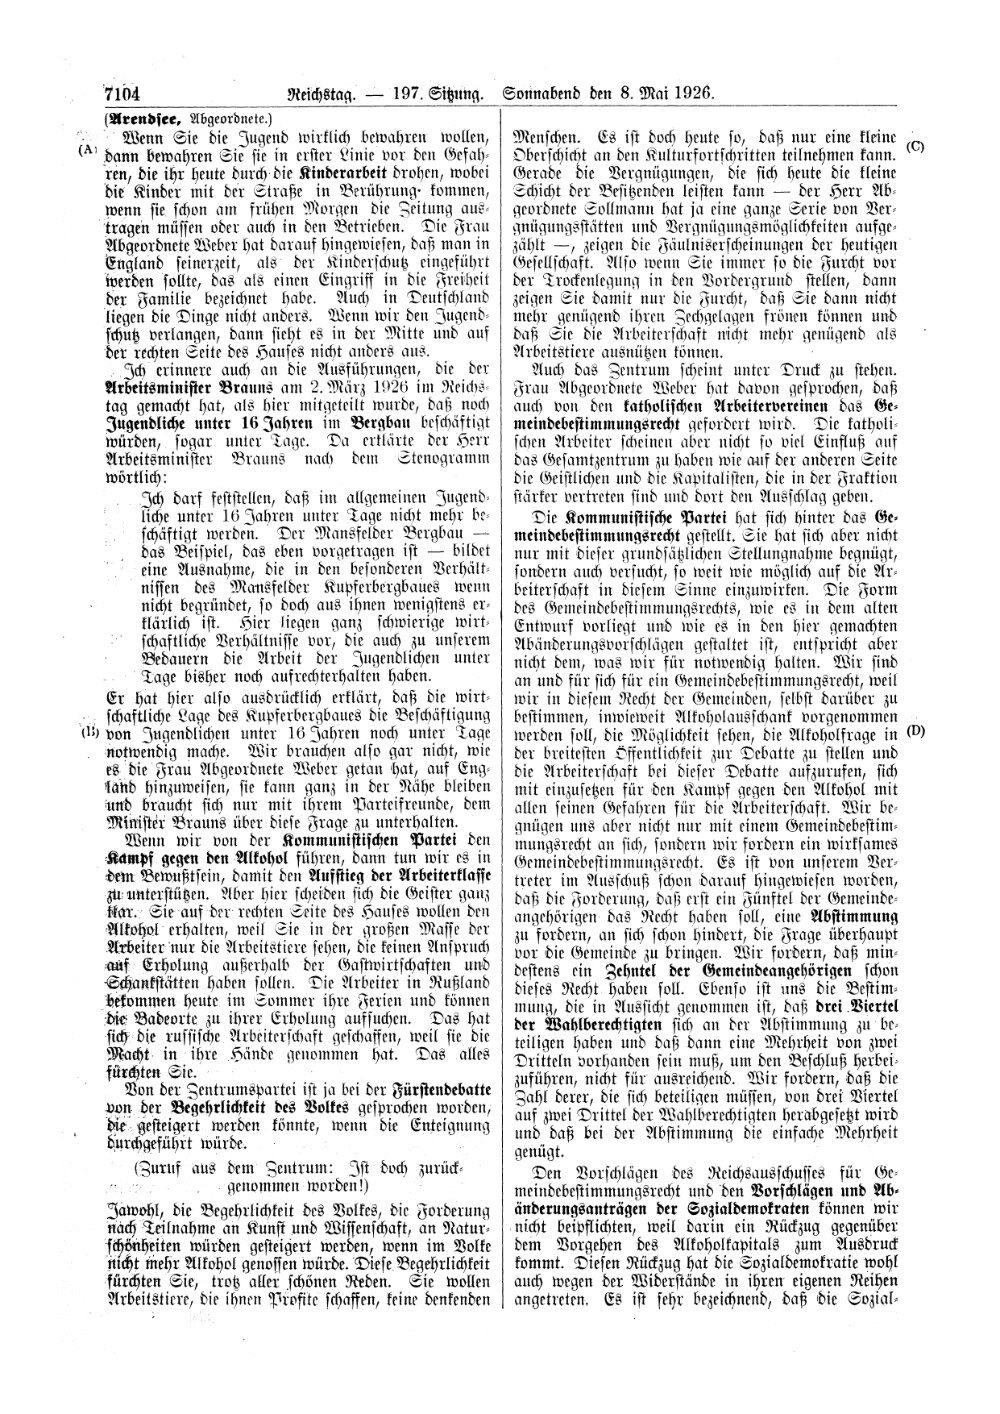 Scan of page 7104